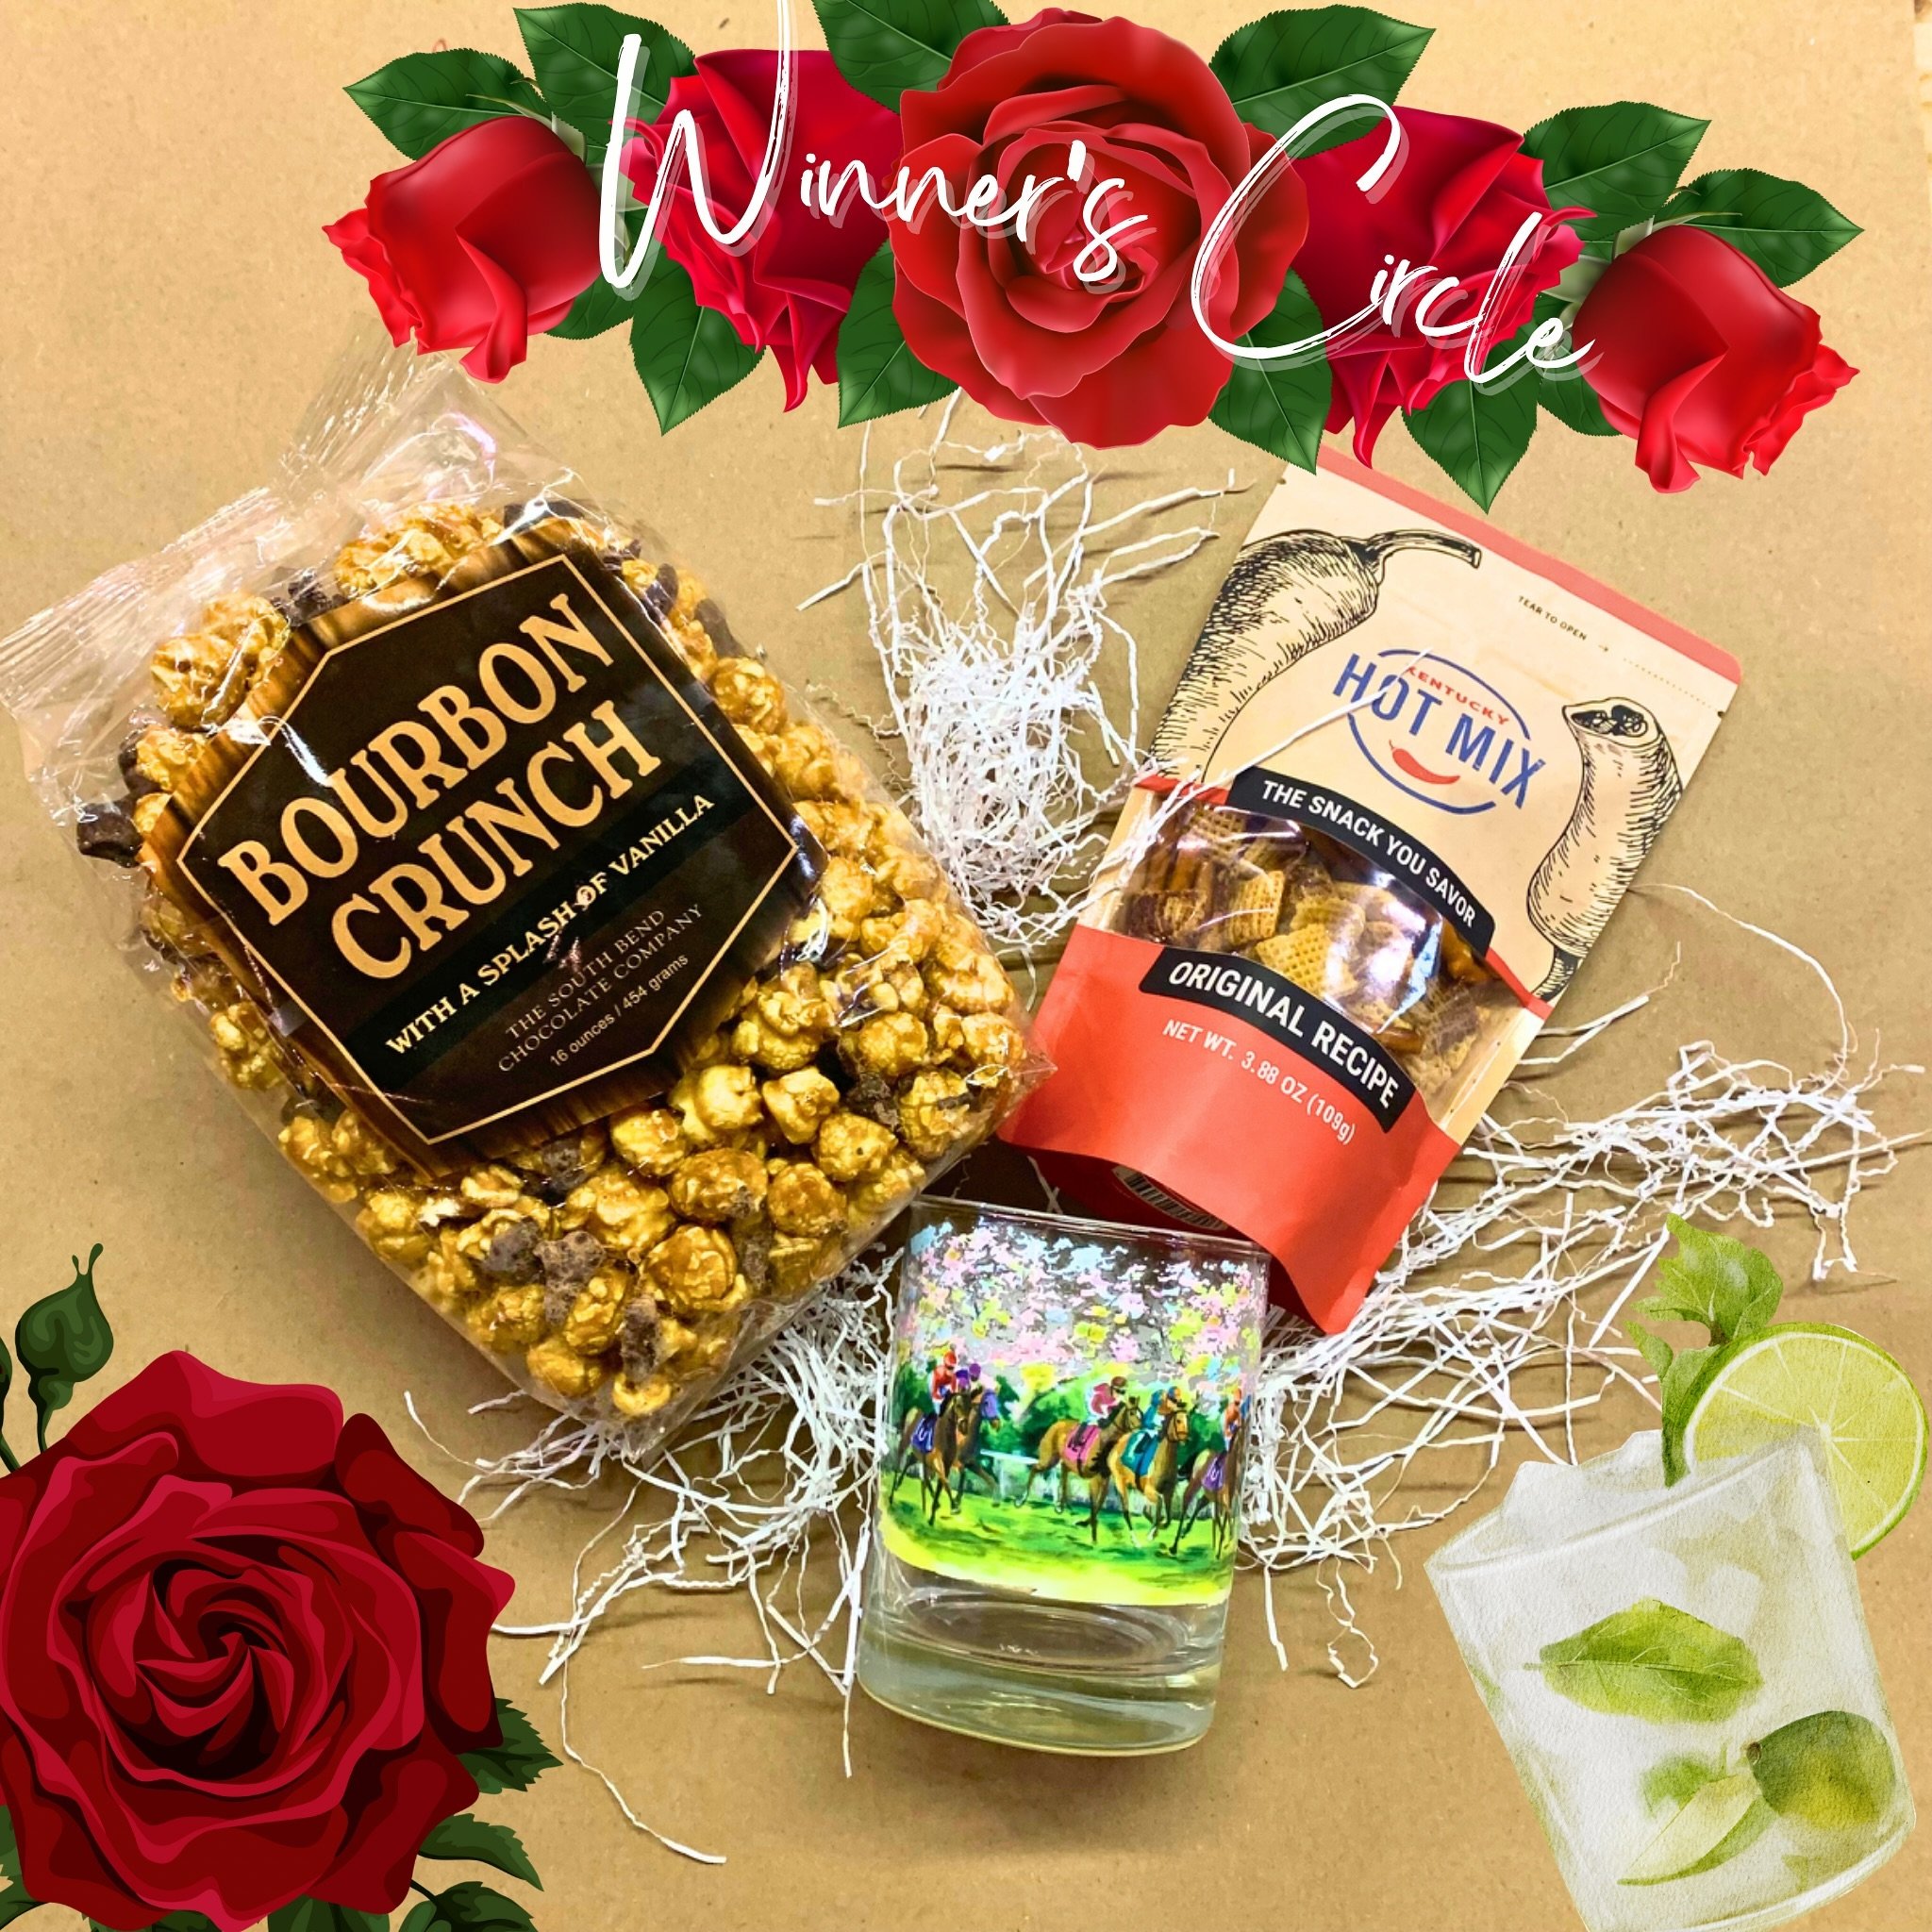 It&rsquo;s almost Derby Weekend! (yes, it needs to be capitalized 🤣) 
This year marks the 150th year of the Kentucky Derby. This is America&rsquo;s longest running sporting event. 
How amazing!!

Want to win this awesome package? Check out our previ